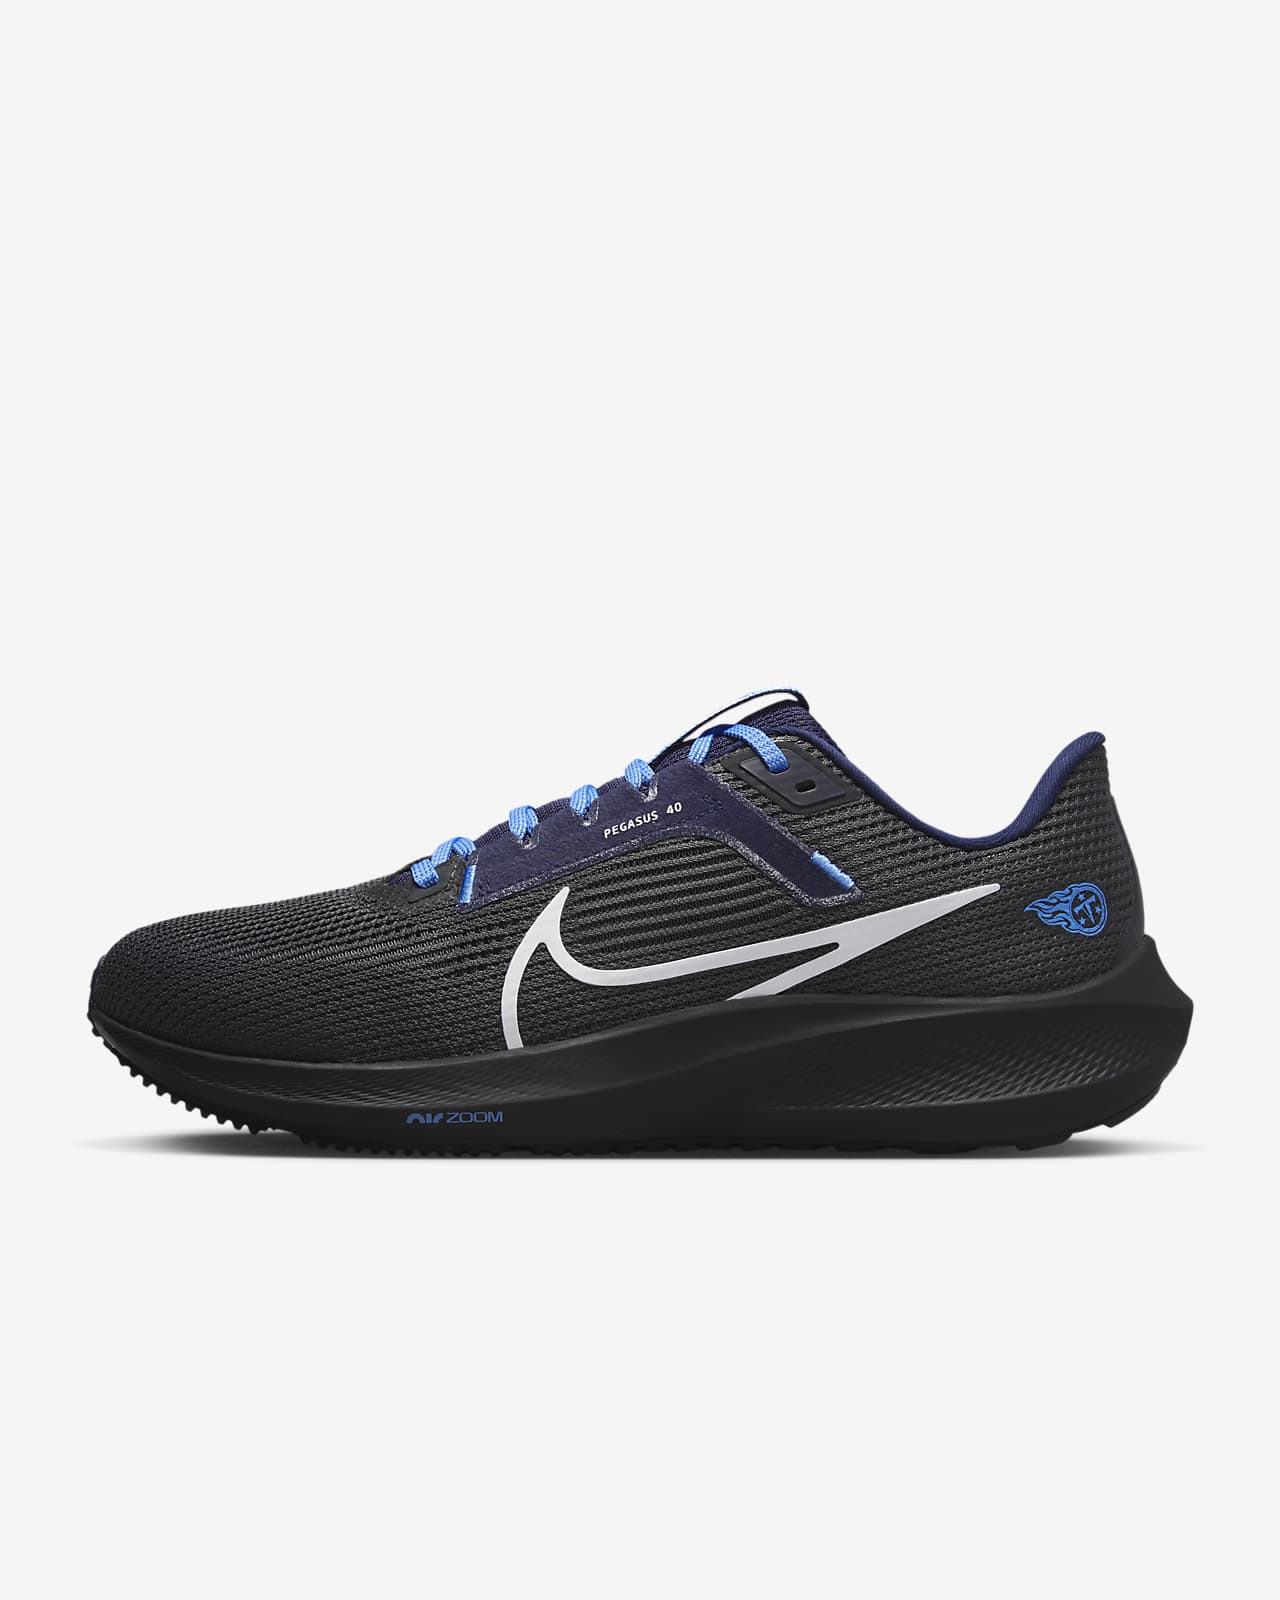 Nike Pegasus 40 (NFL Tennessee Titans) Men's Road Running Shoes